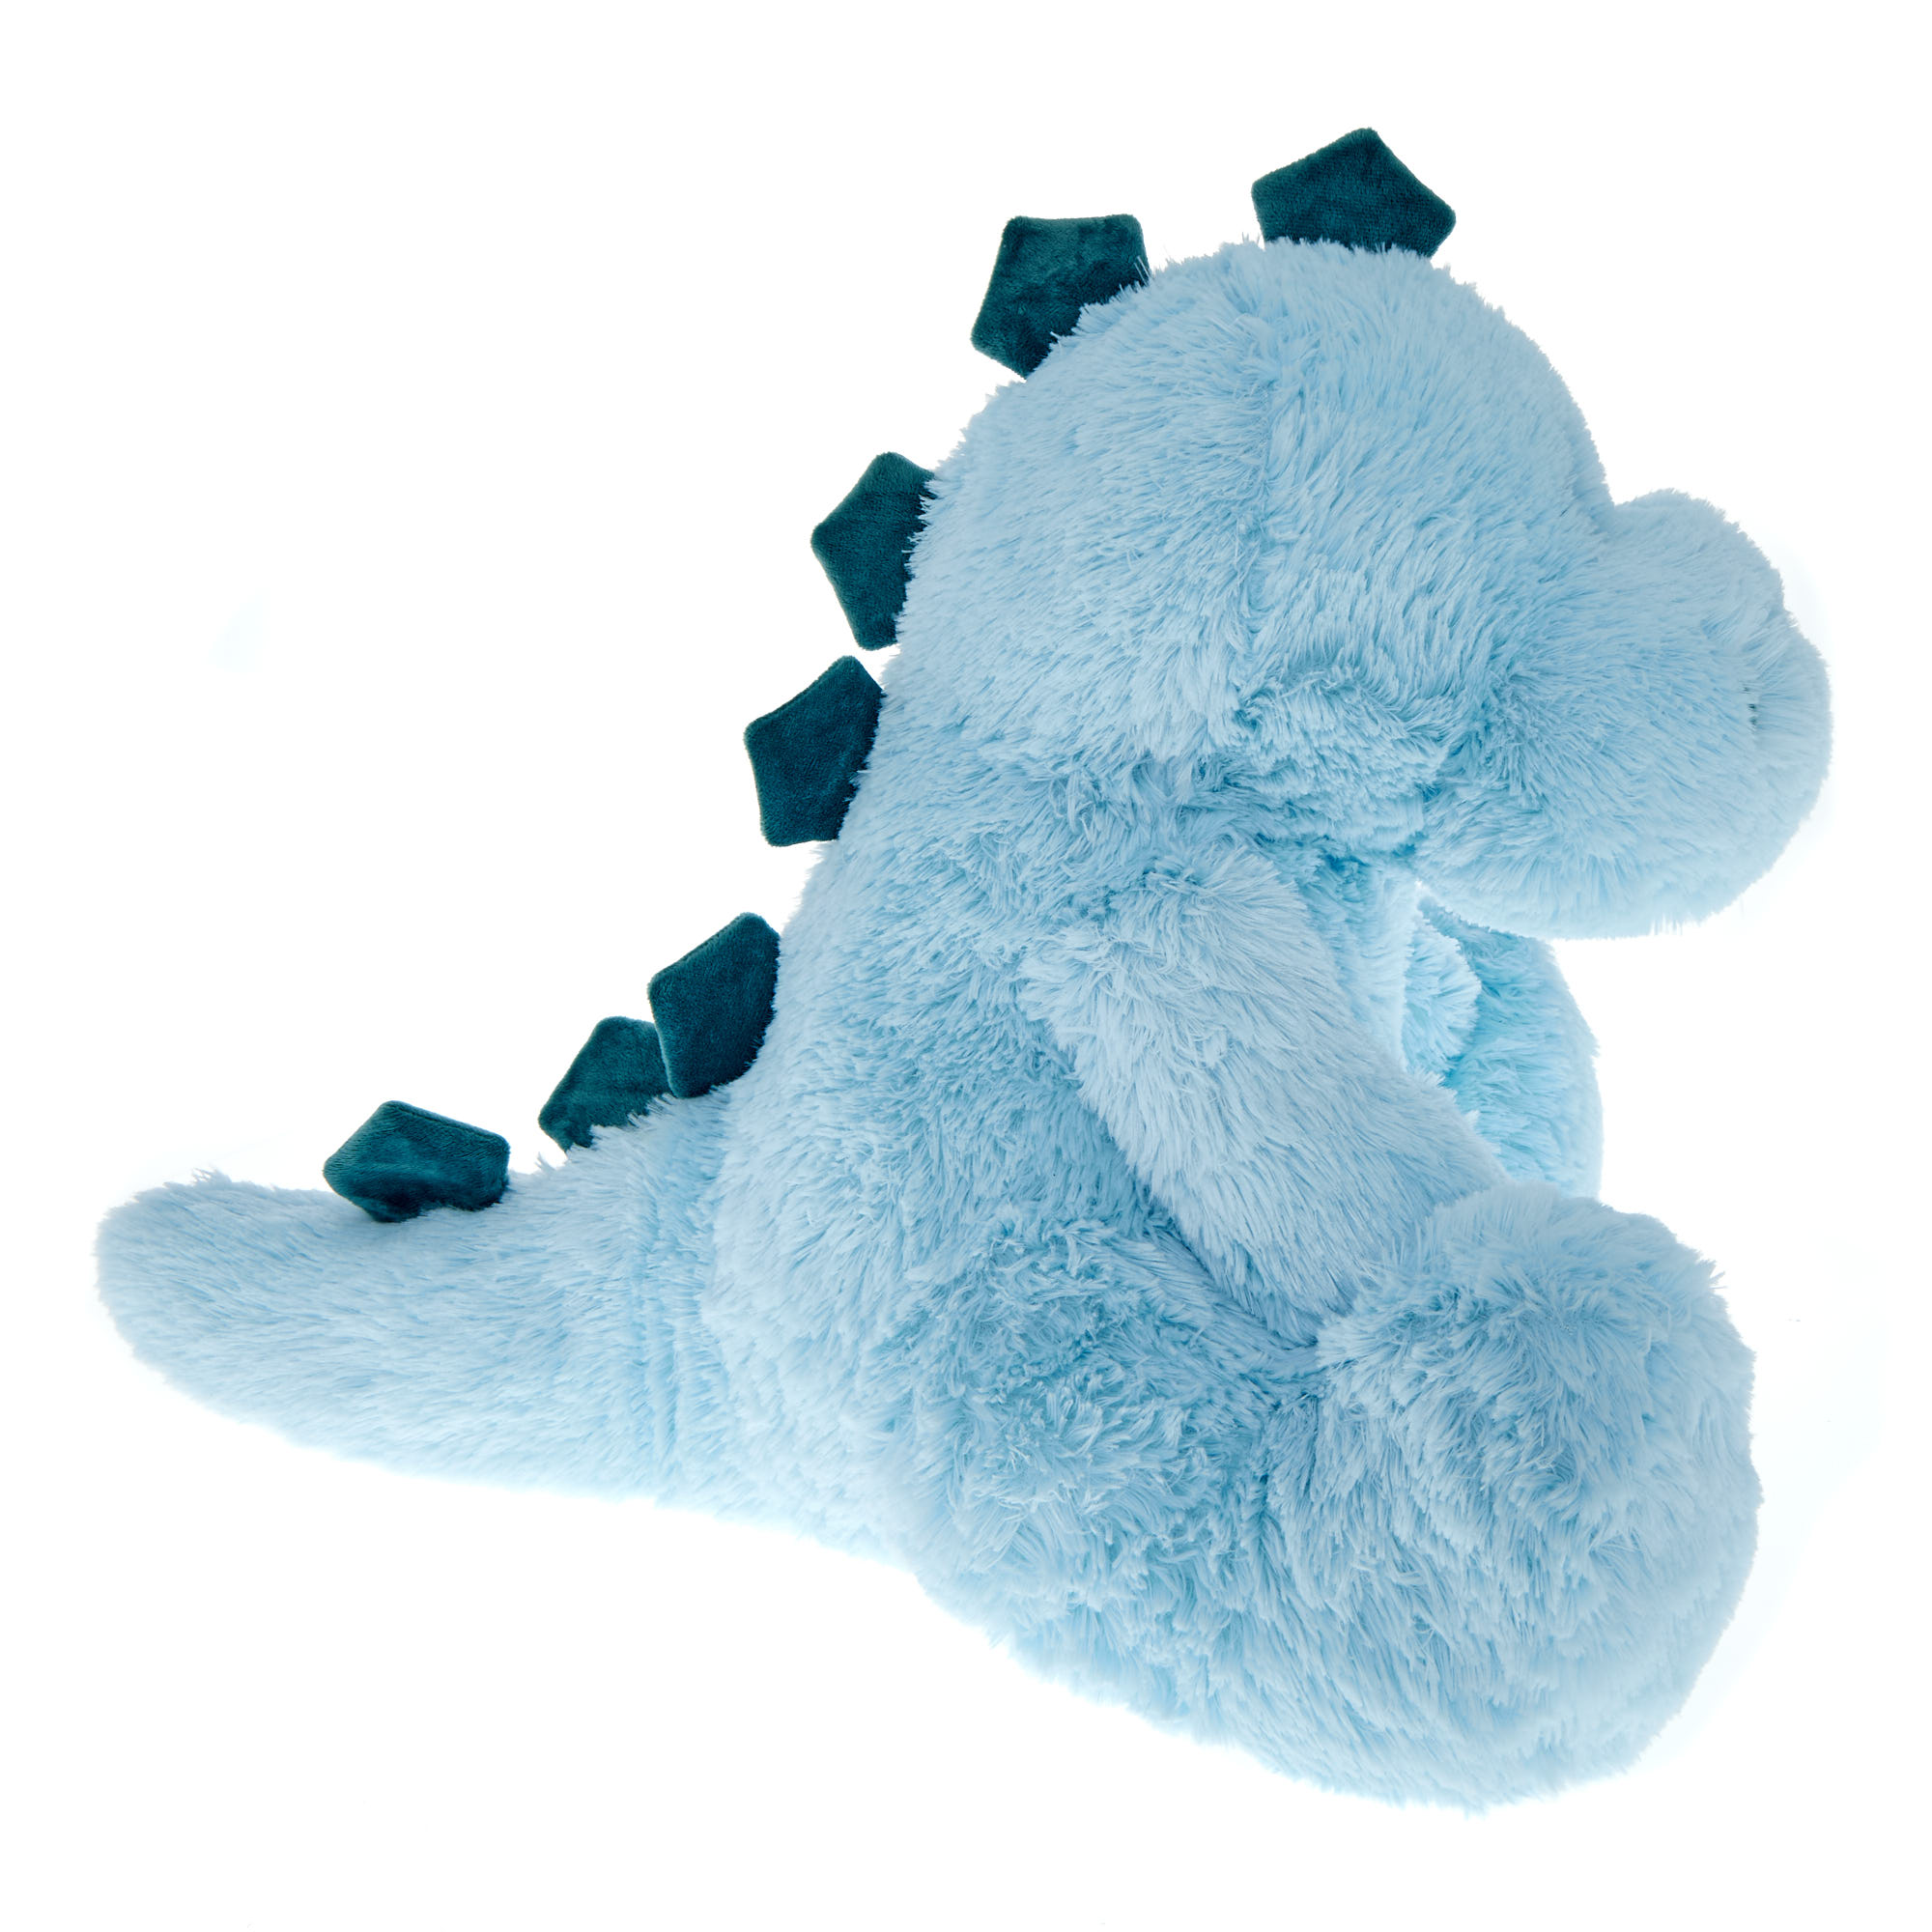 Buy Extra Large Dinosaur Soft Toy for GBP 9.99 | Card Factory UK